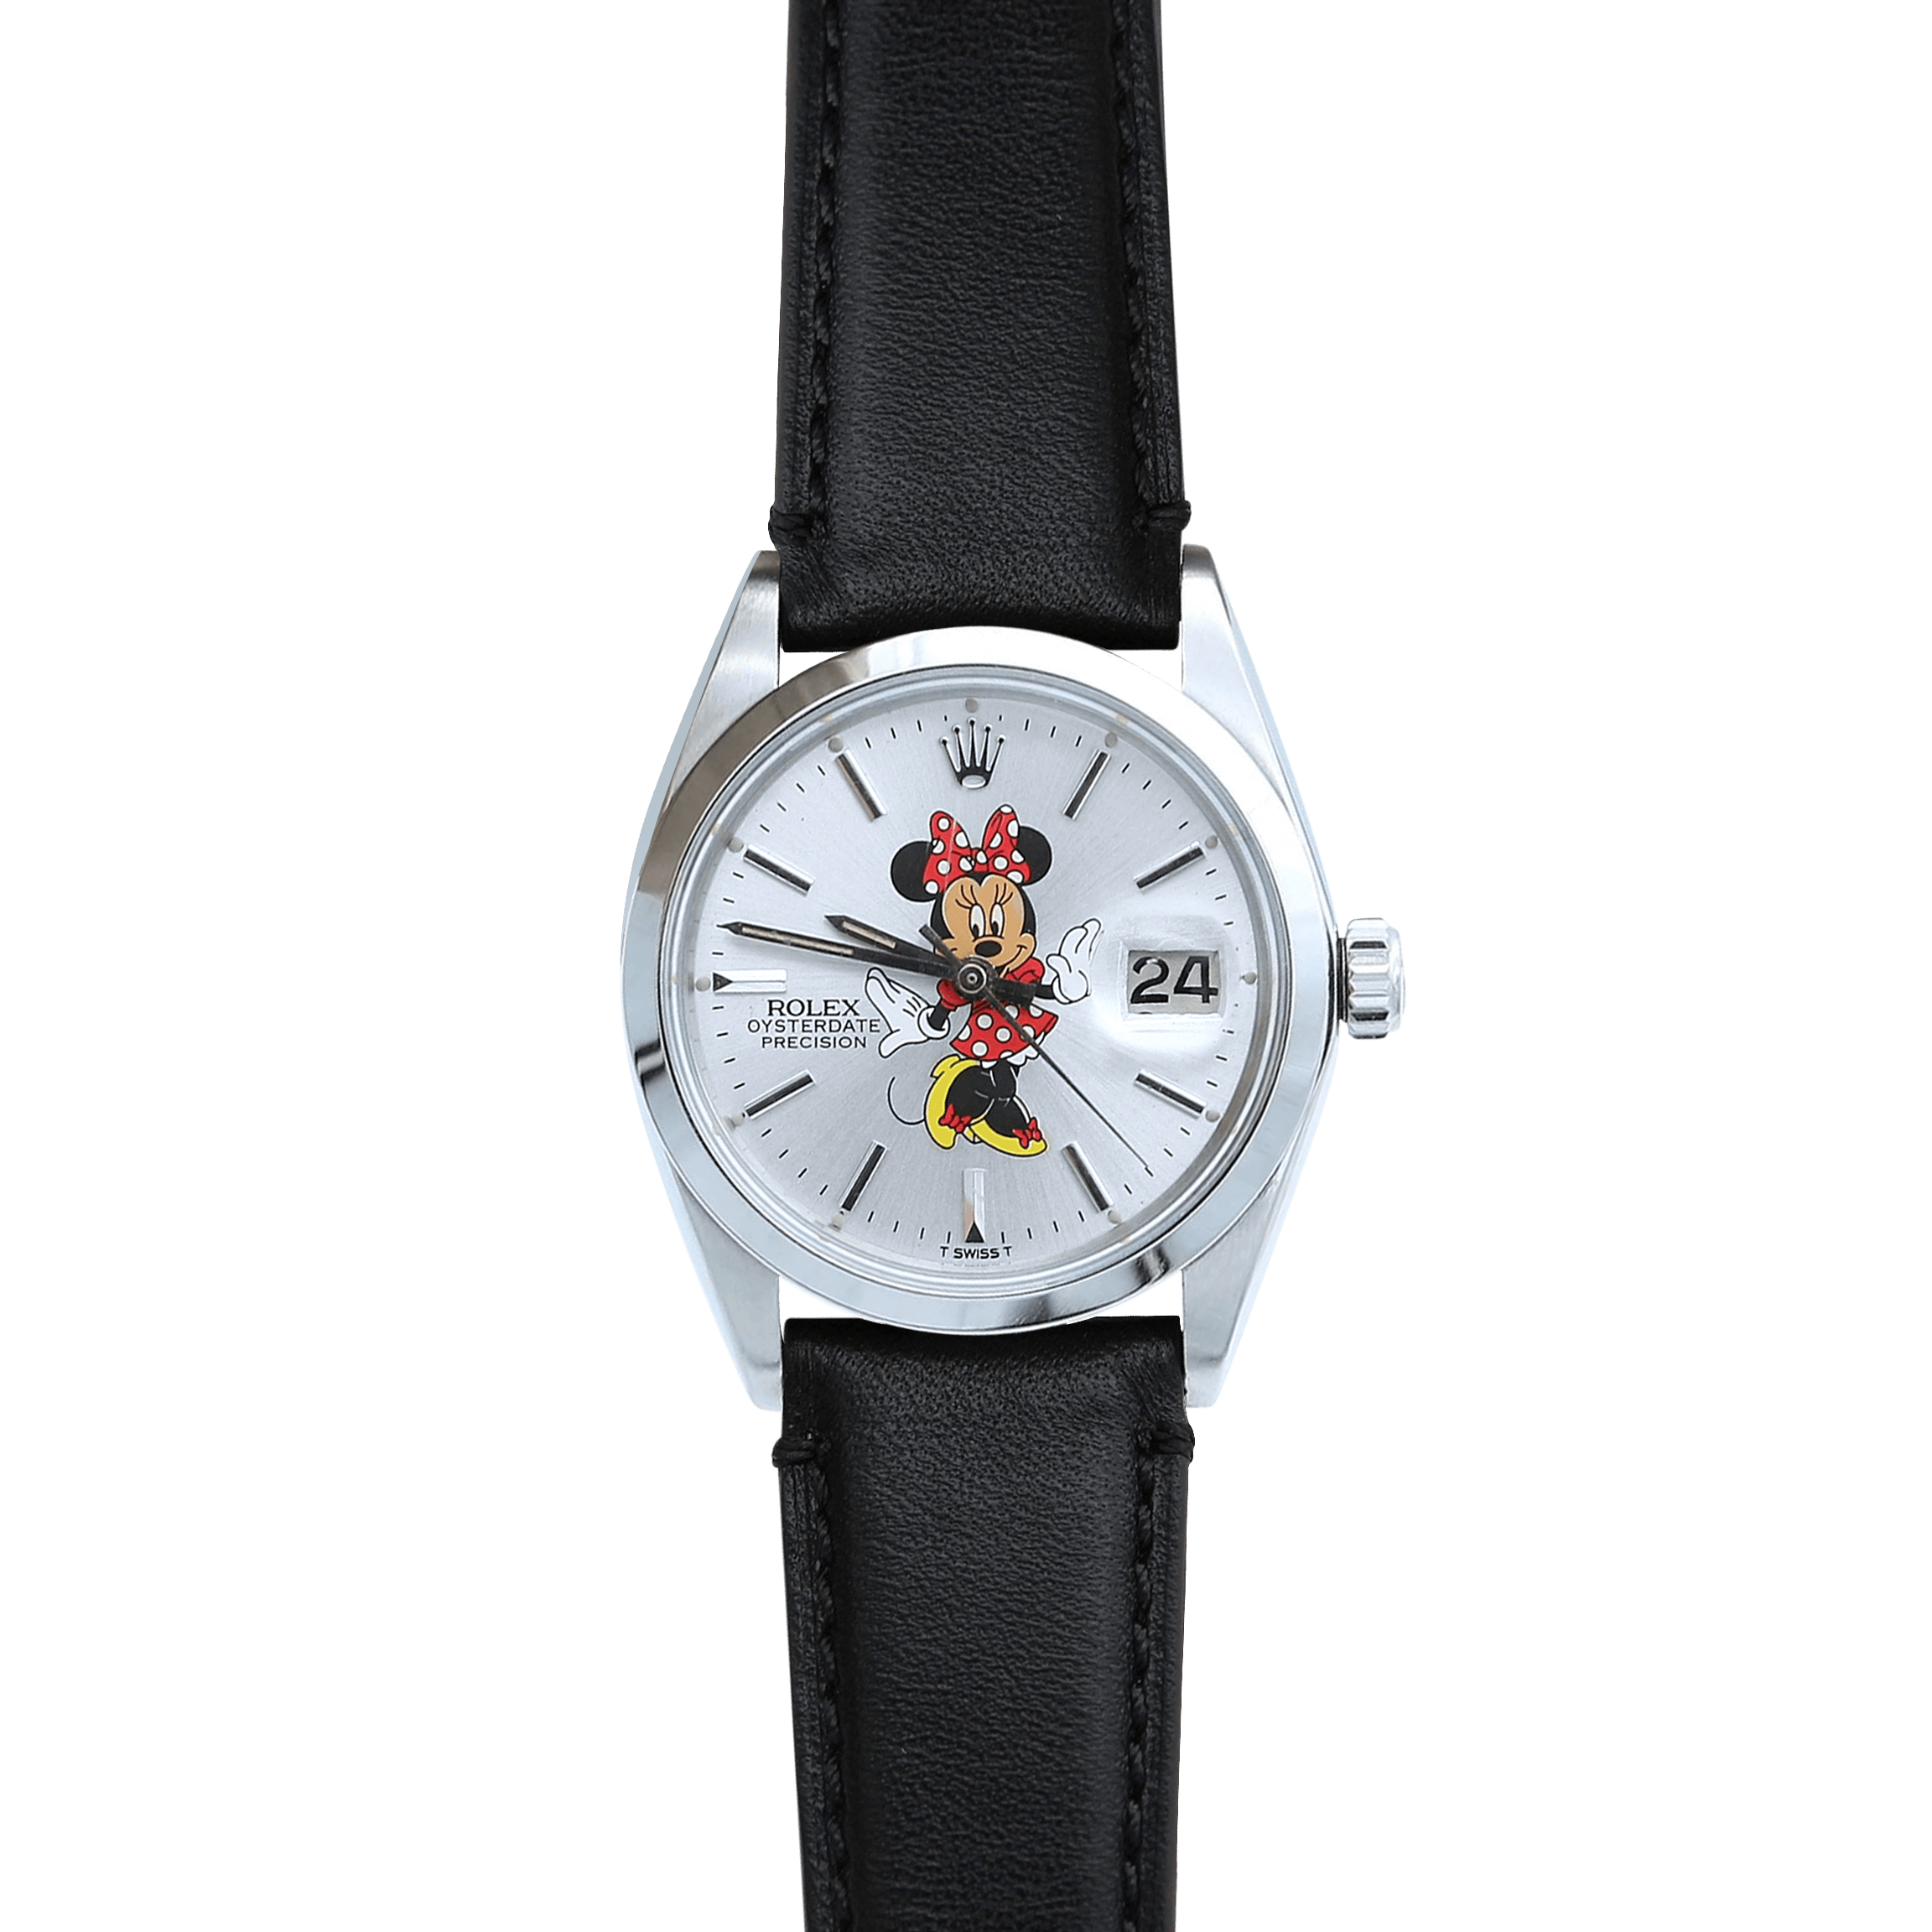 Rolex Precision Date ref 6694  Minnie Mouse Dial Leather Strap